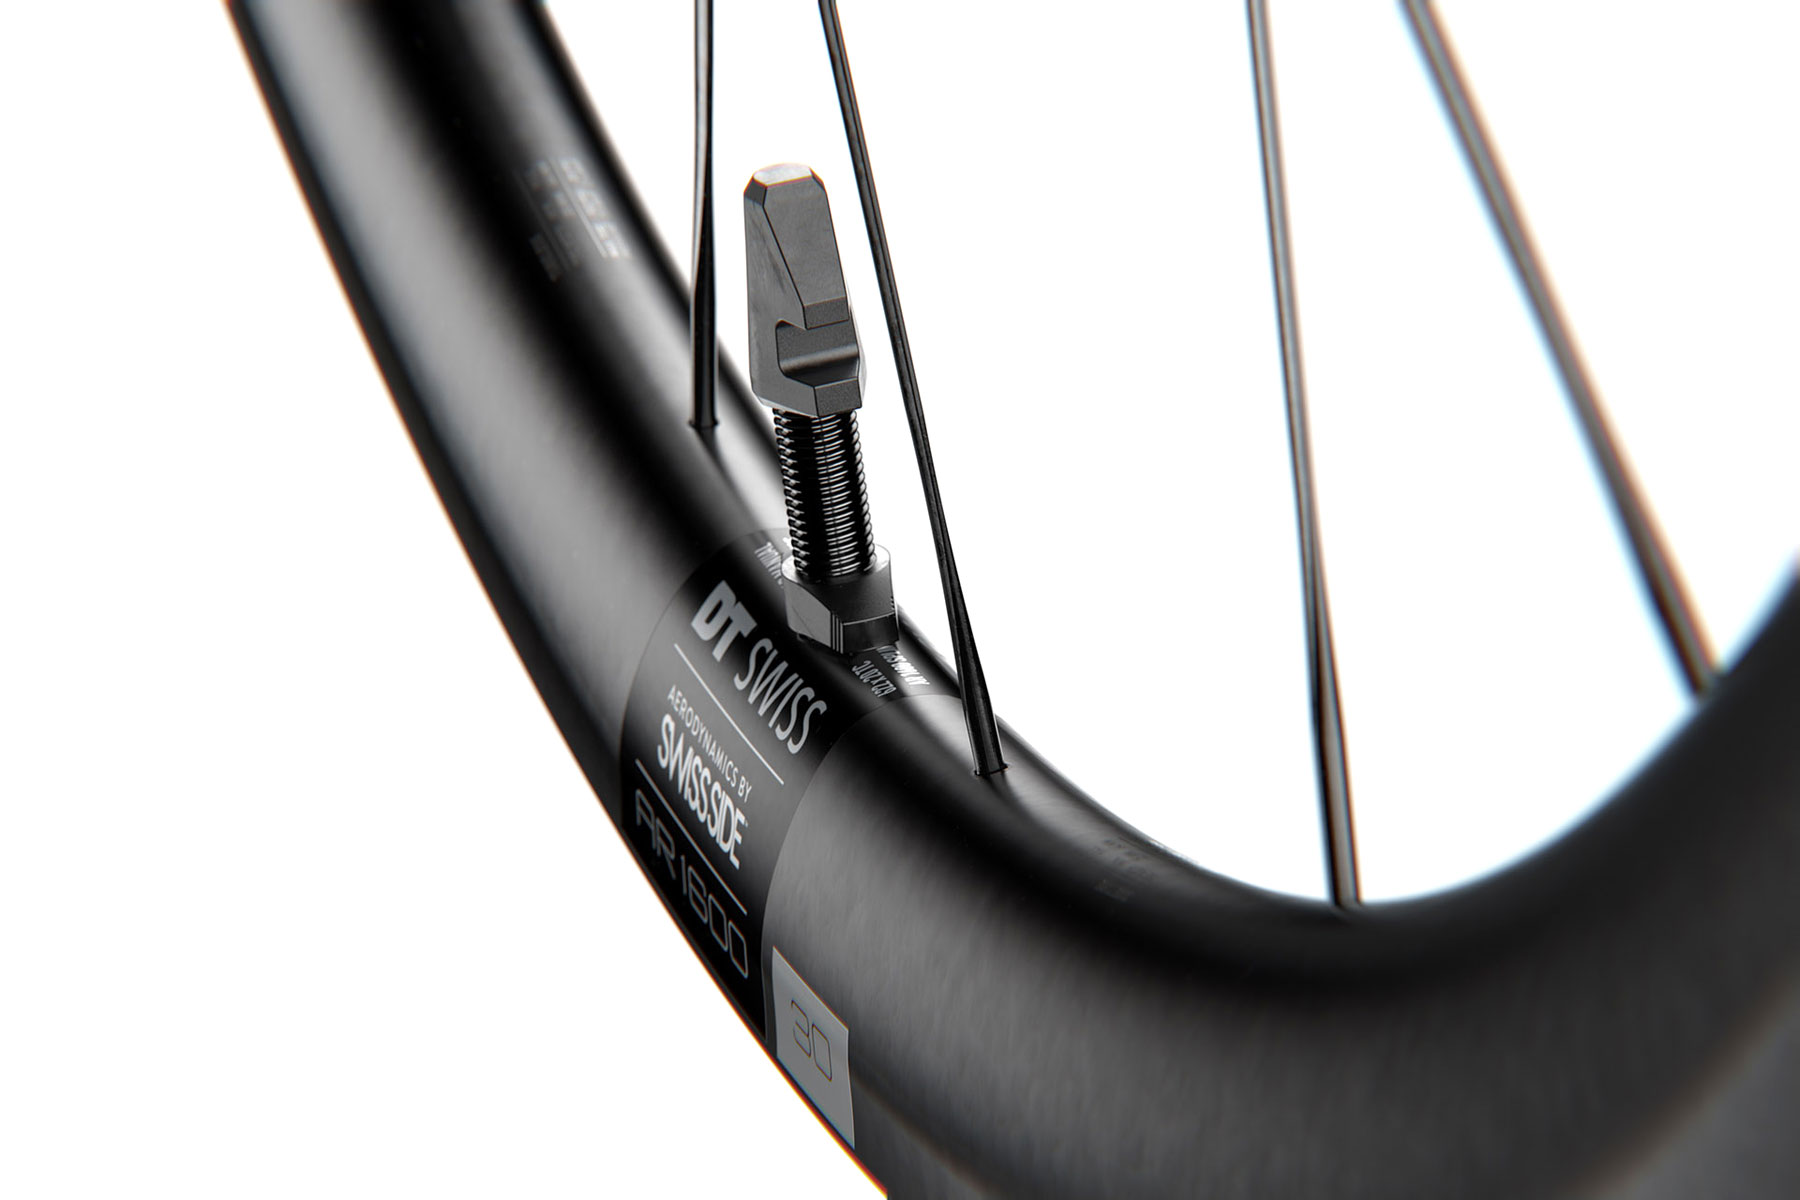 DT Swiss affordable aerodynamic aluminum aero alloy road all-road gravel wheels, A-series with internal nipples